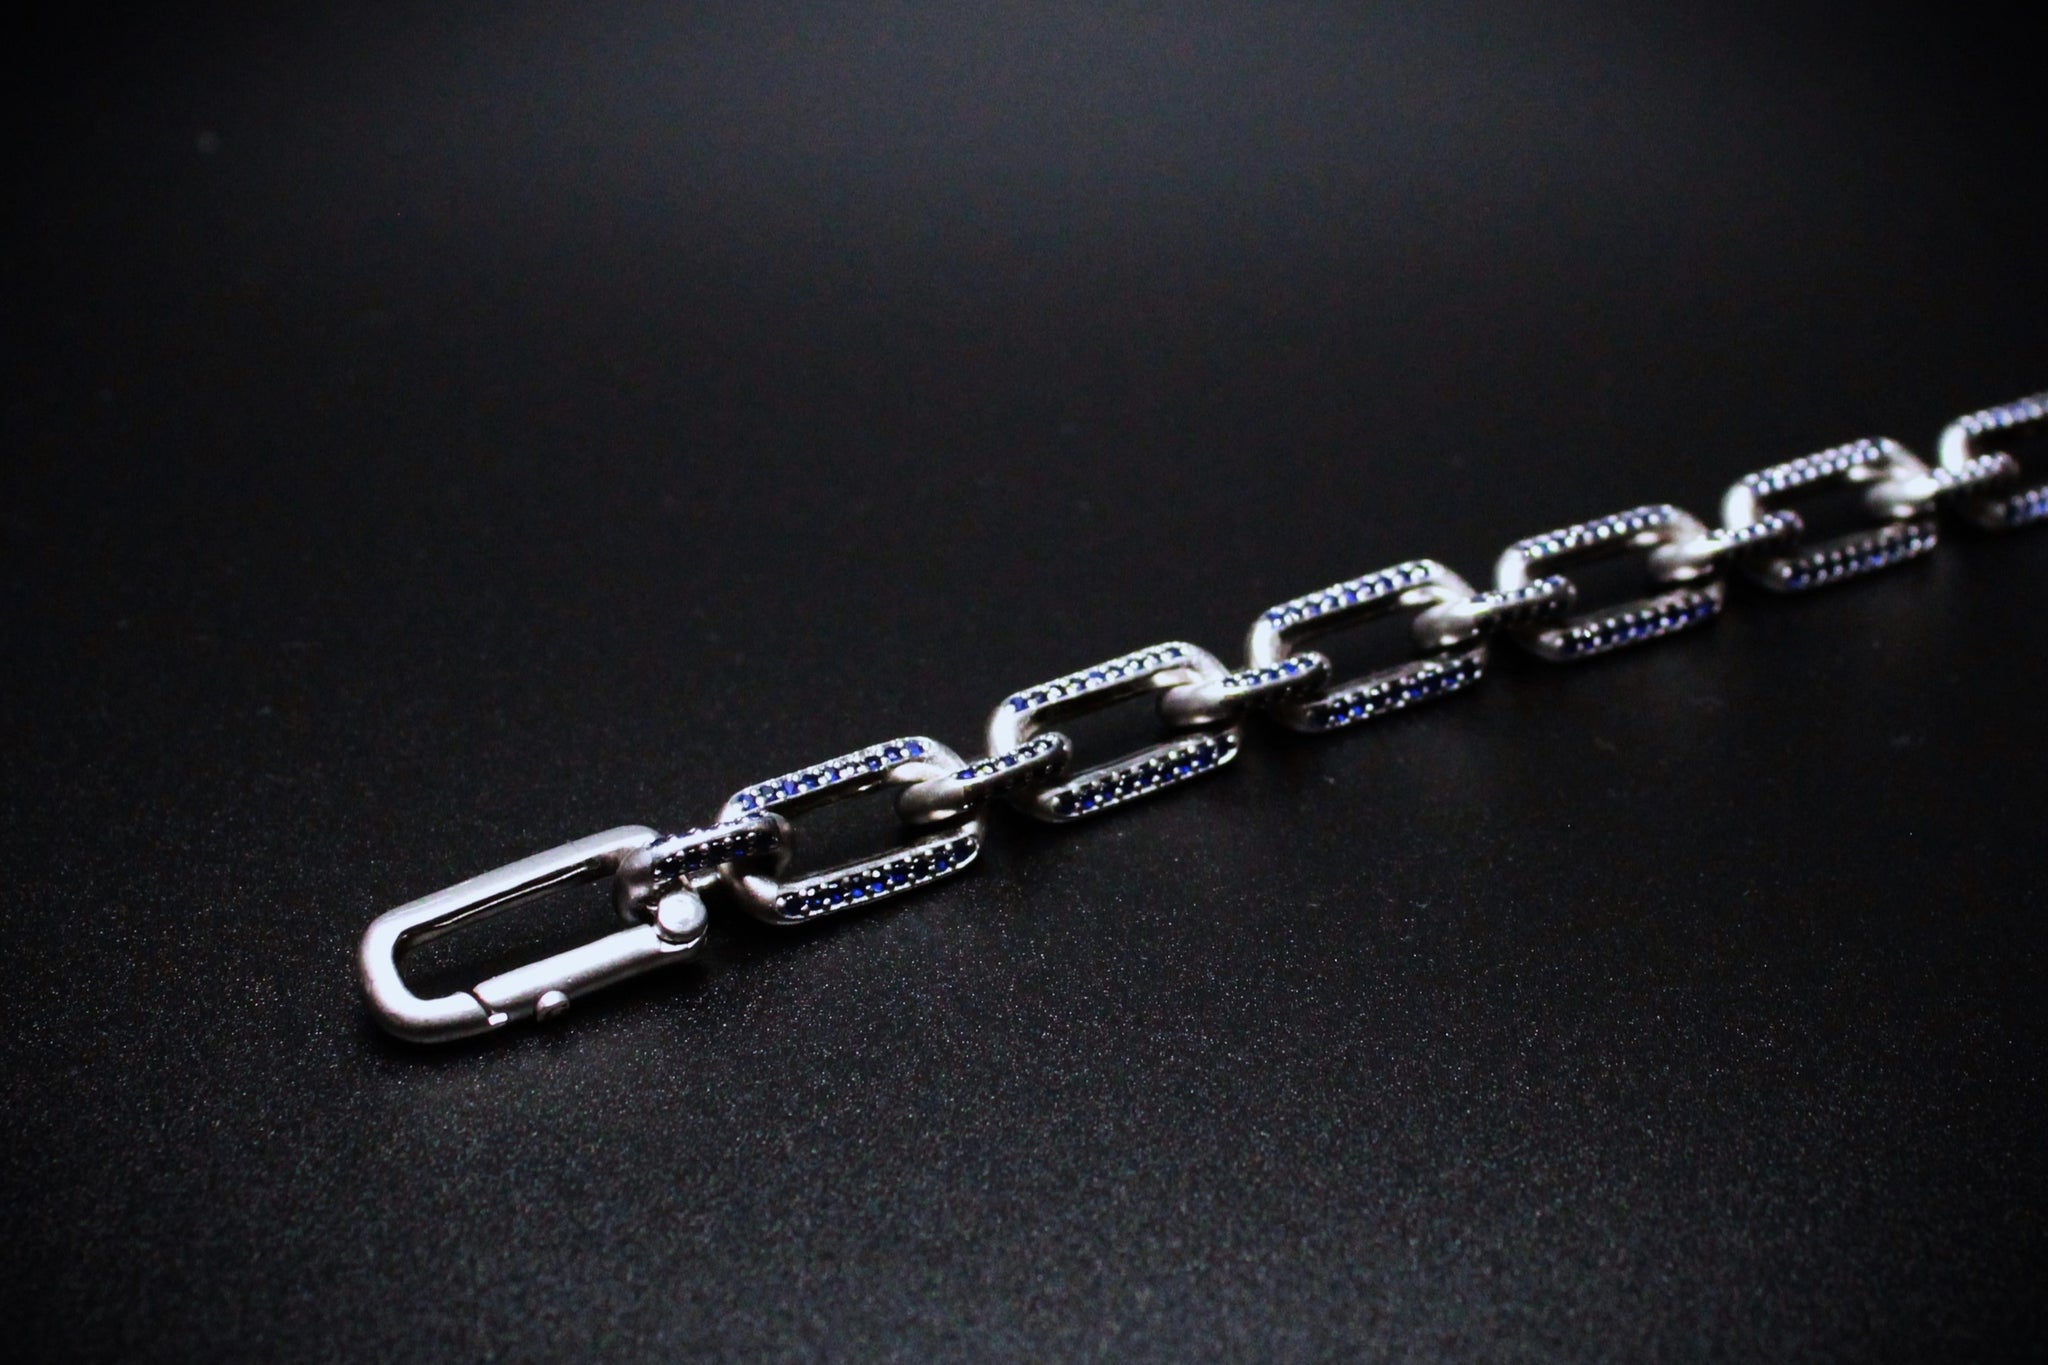 Elongated diamond link bracelet in Sterling Silver with Blue Sapphire